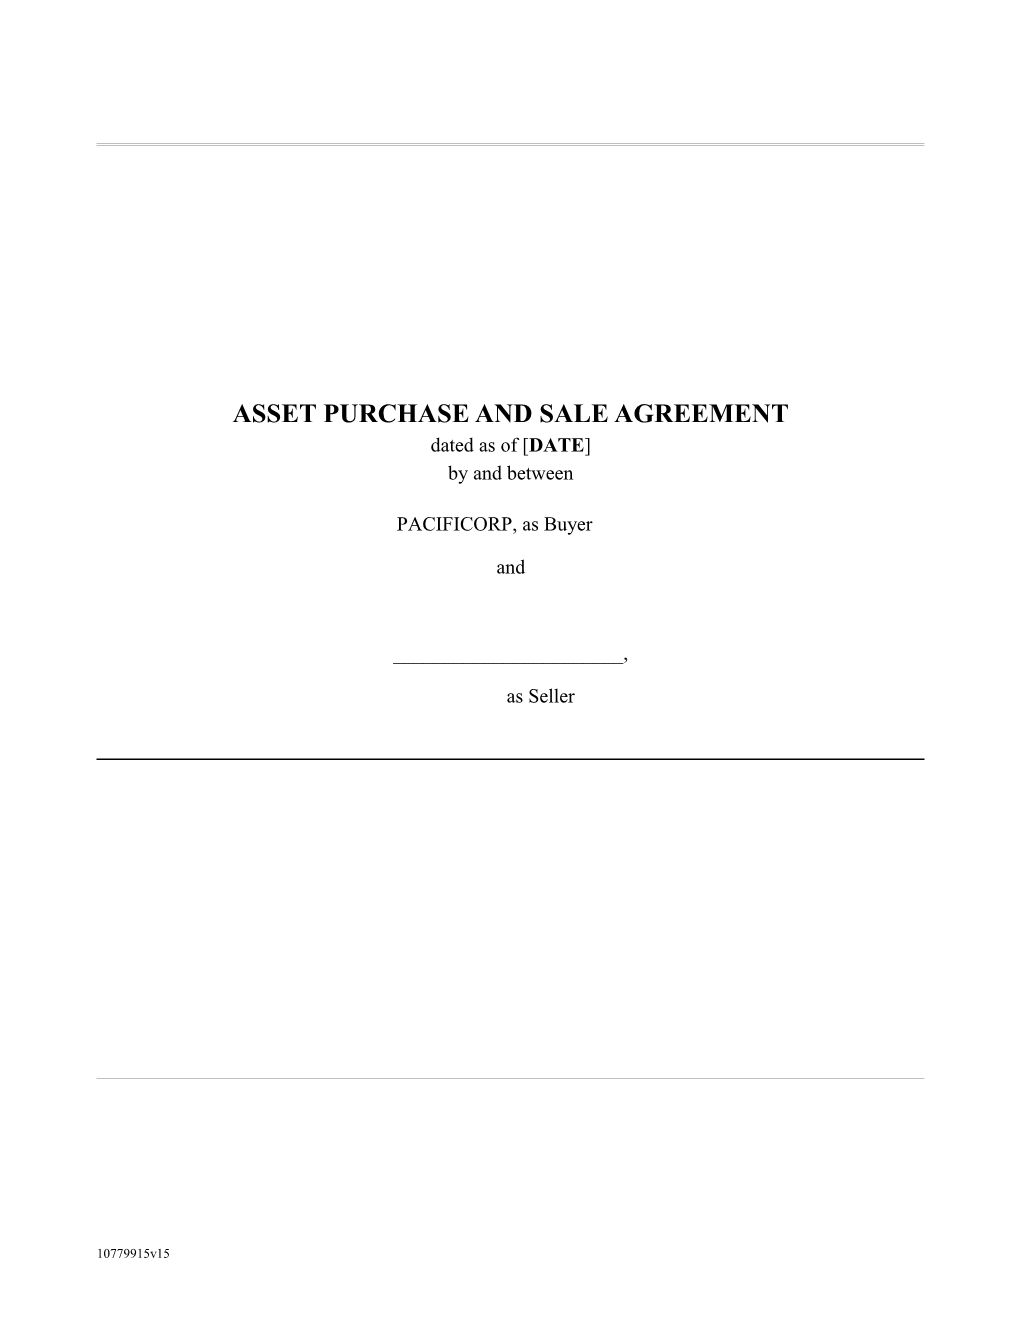 Asset Purchase and Sale Agreement